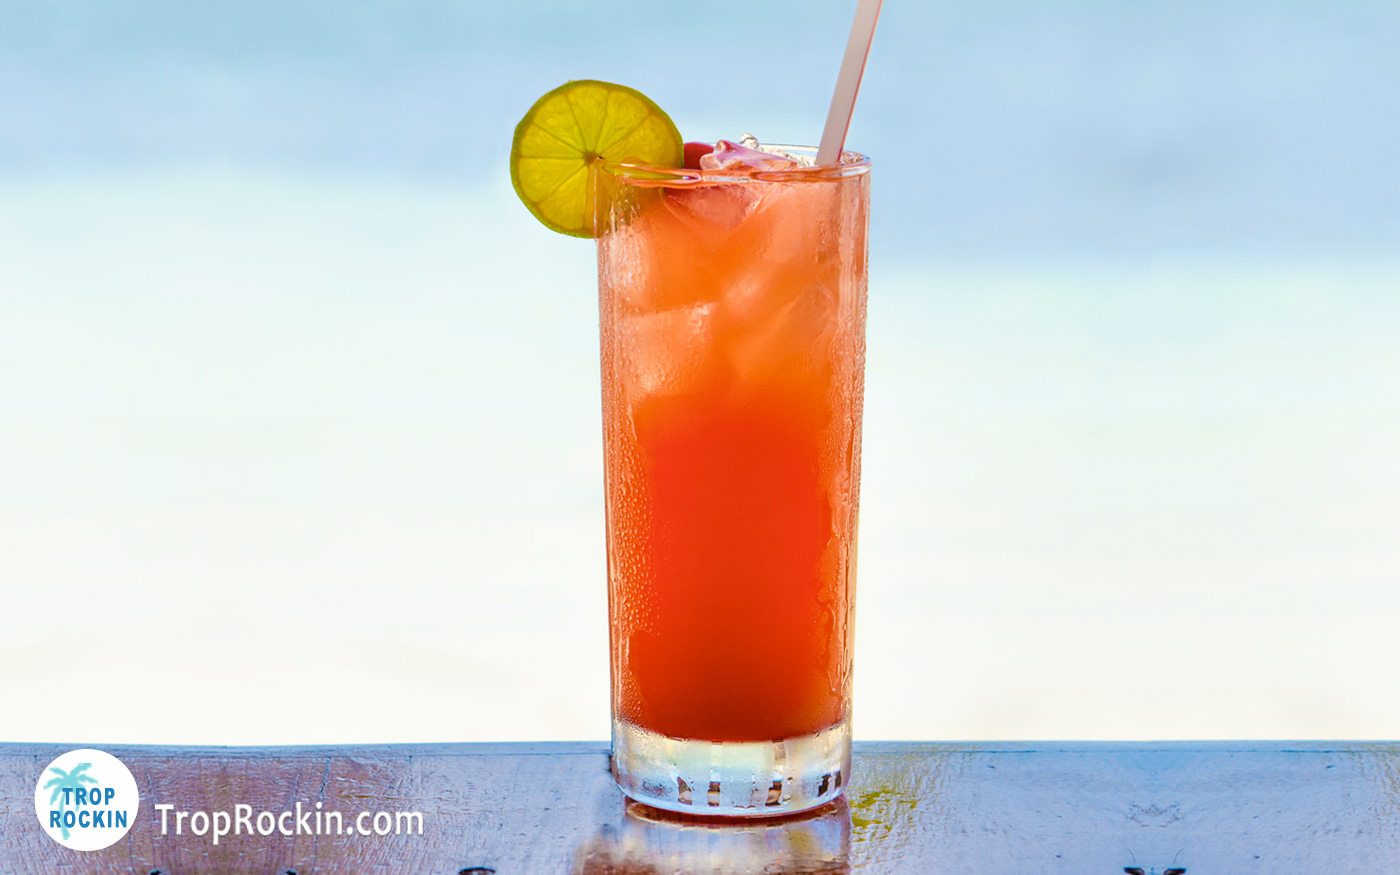 Tropical Bay Breeze drink with lime slice for garnish on table with a beach in the background.